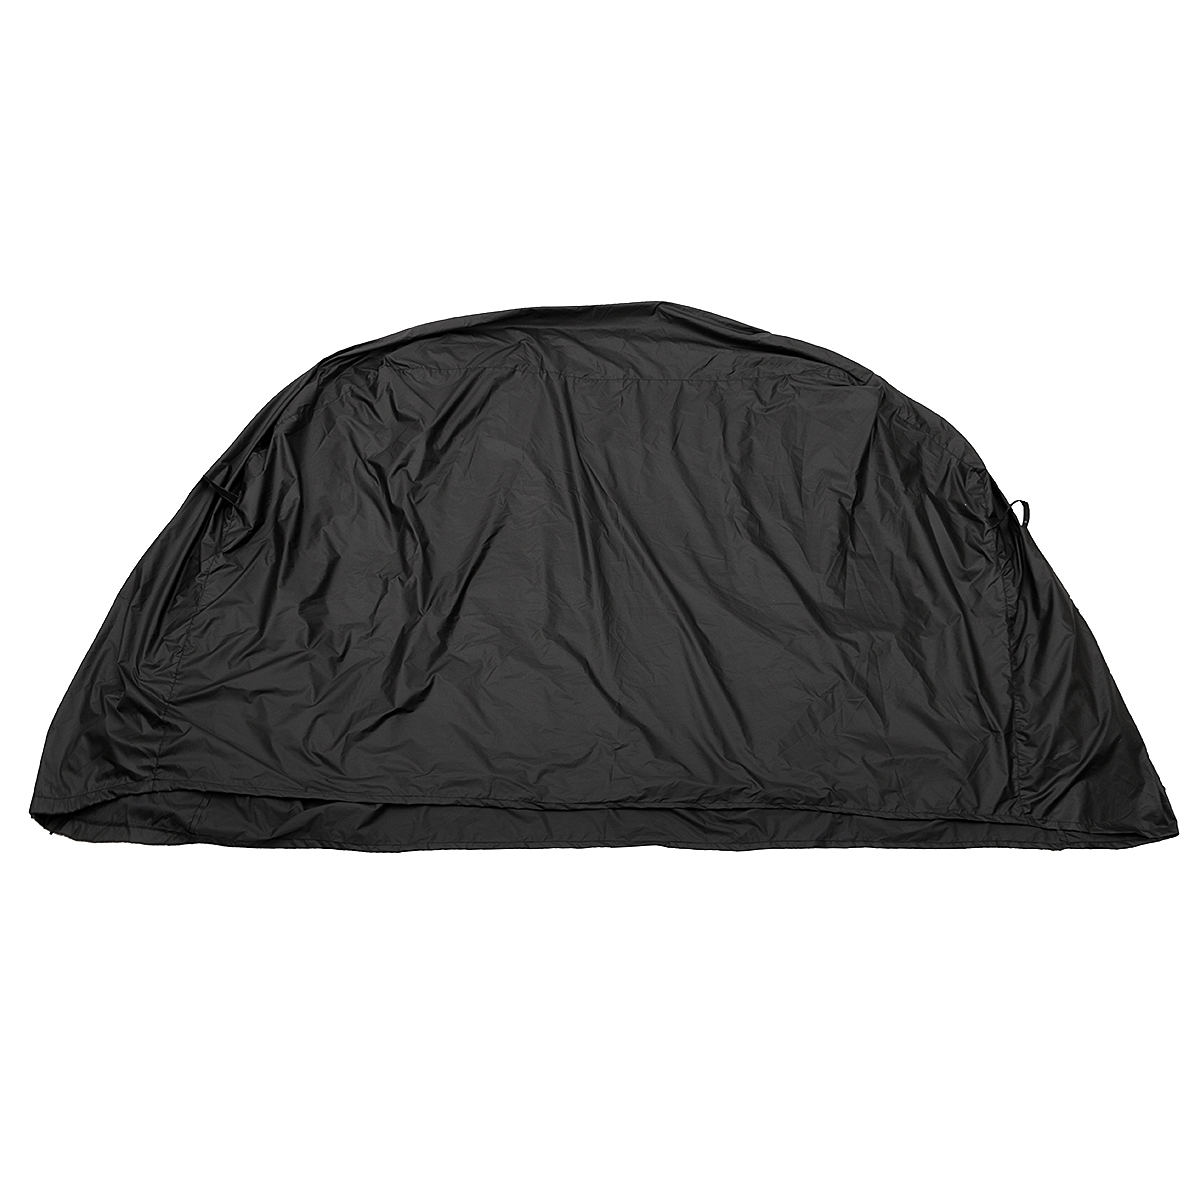 Barbecue-BBQ-Grill-Cover-Storage-Bag-for-Weber-7109-Summit-600-Series-Gas-Grill-1351780-2